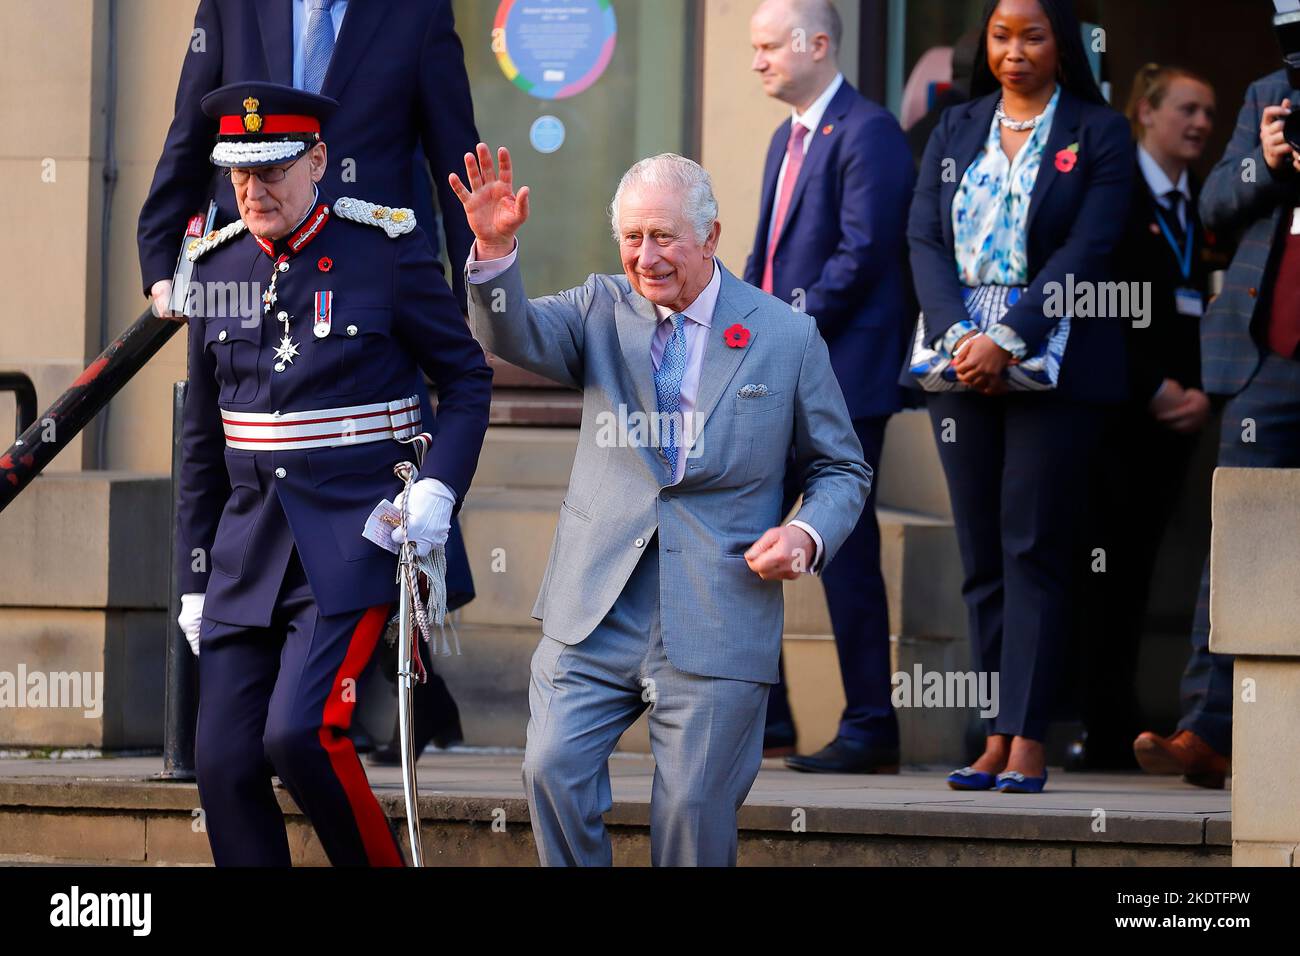 King Charles III outside Leeds Central Library & Art Gallery during his first visit to Yorkshire as King. Stock Photo